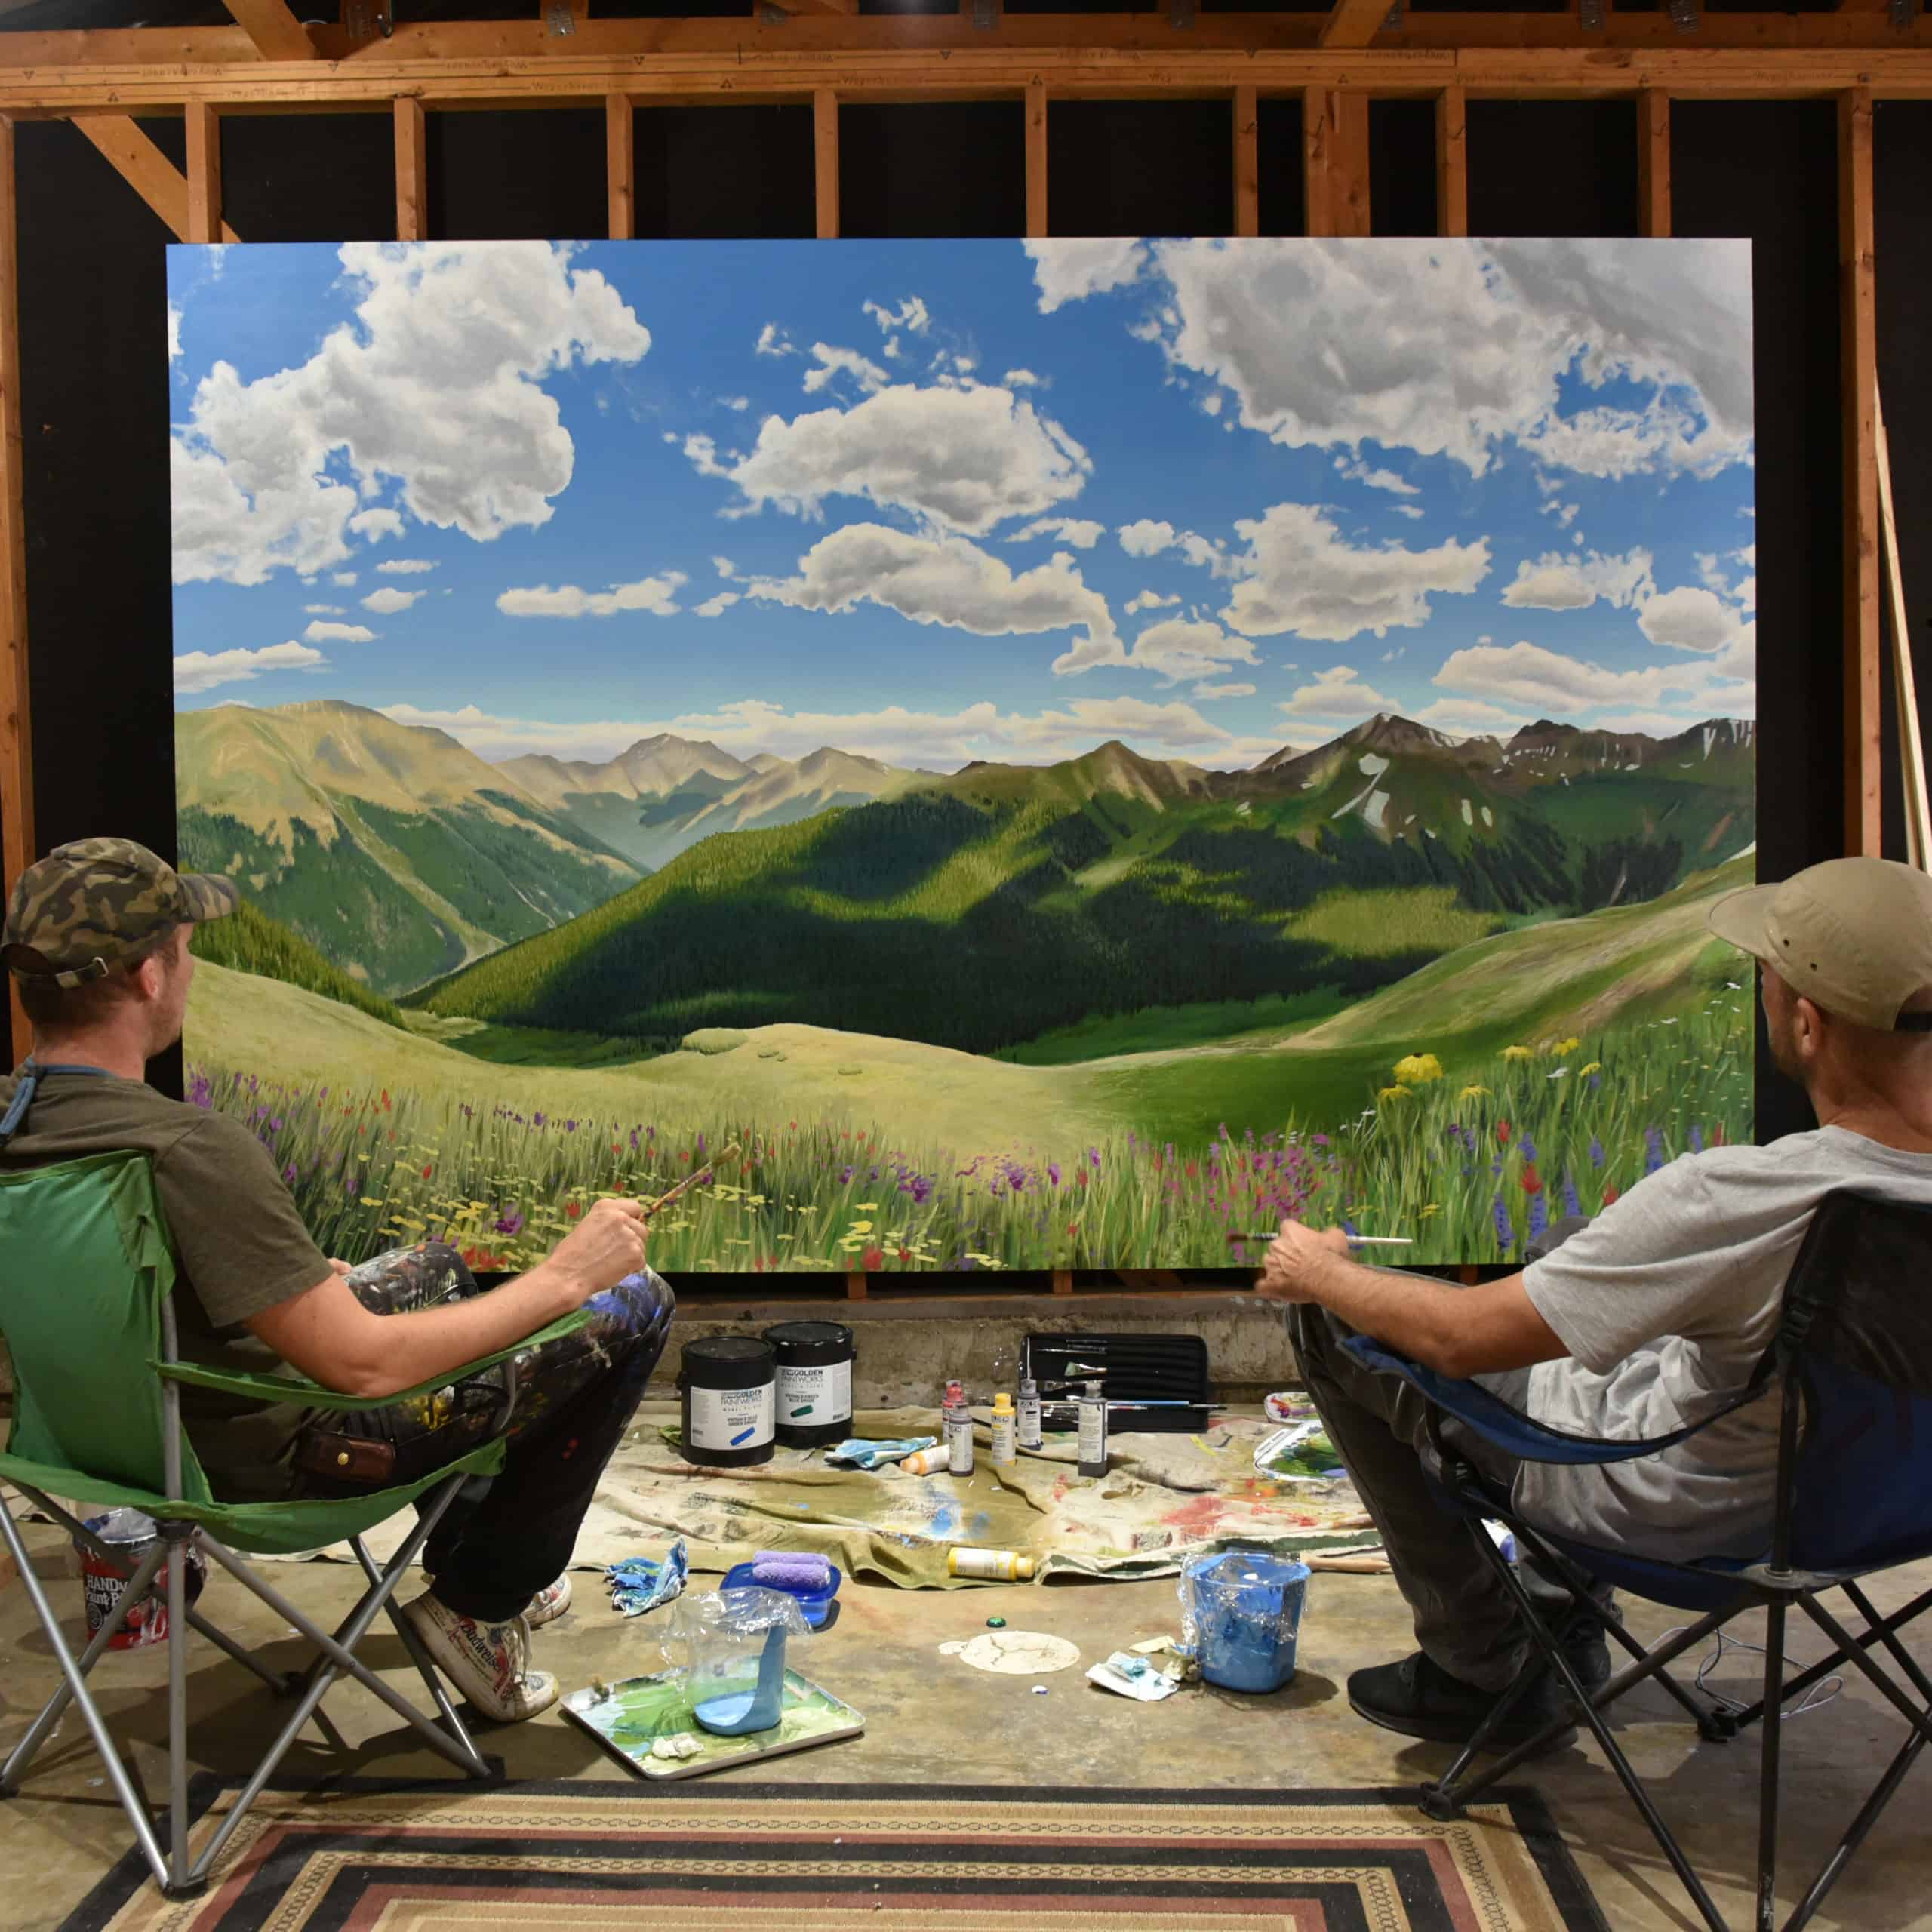 Landscape painting created by Jason T. Graves and Remington Robinson